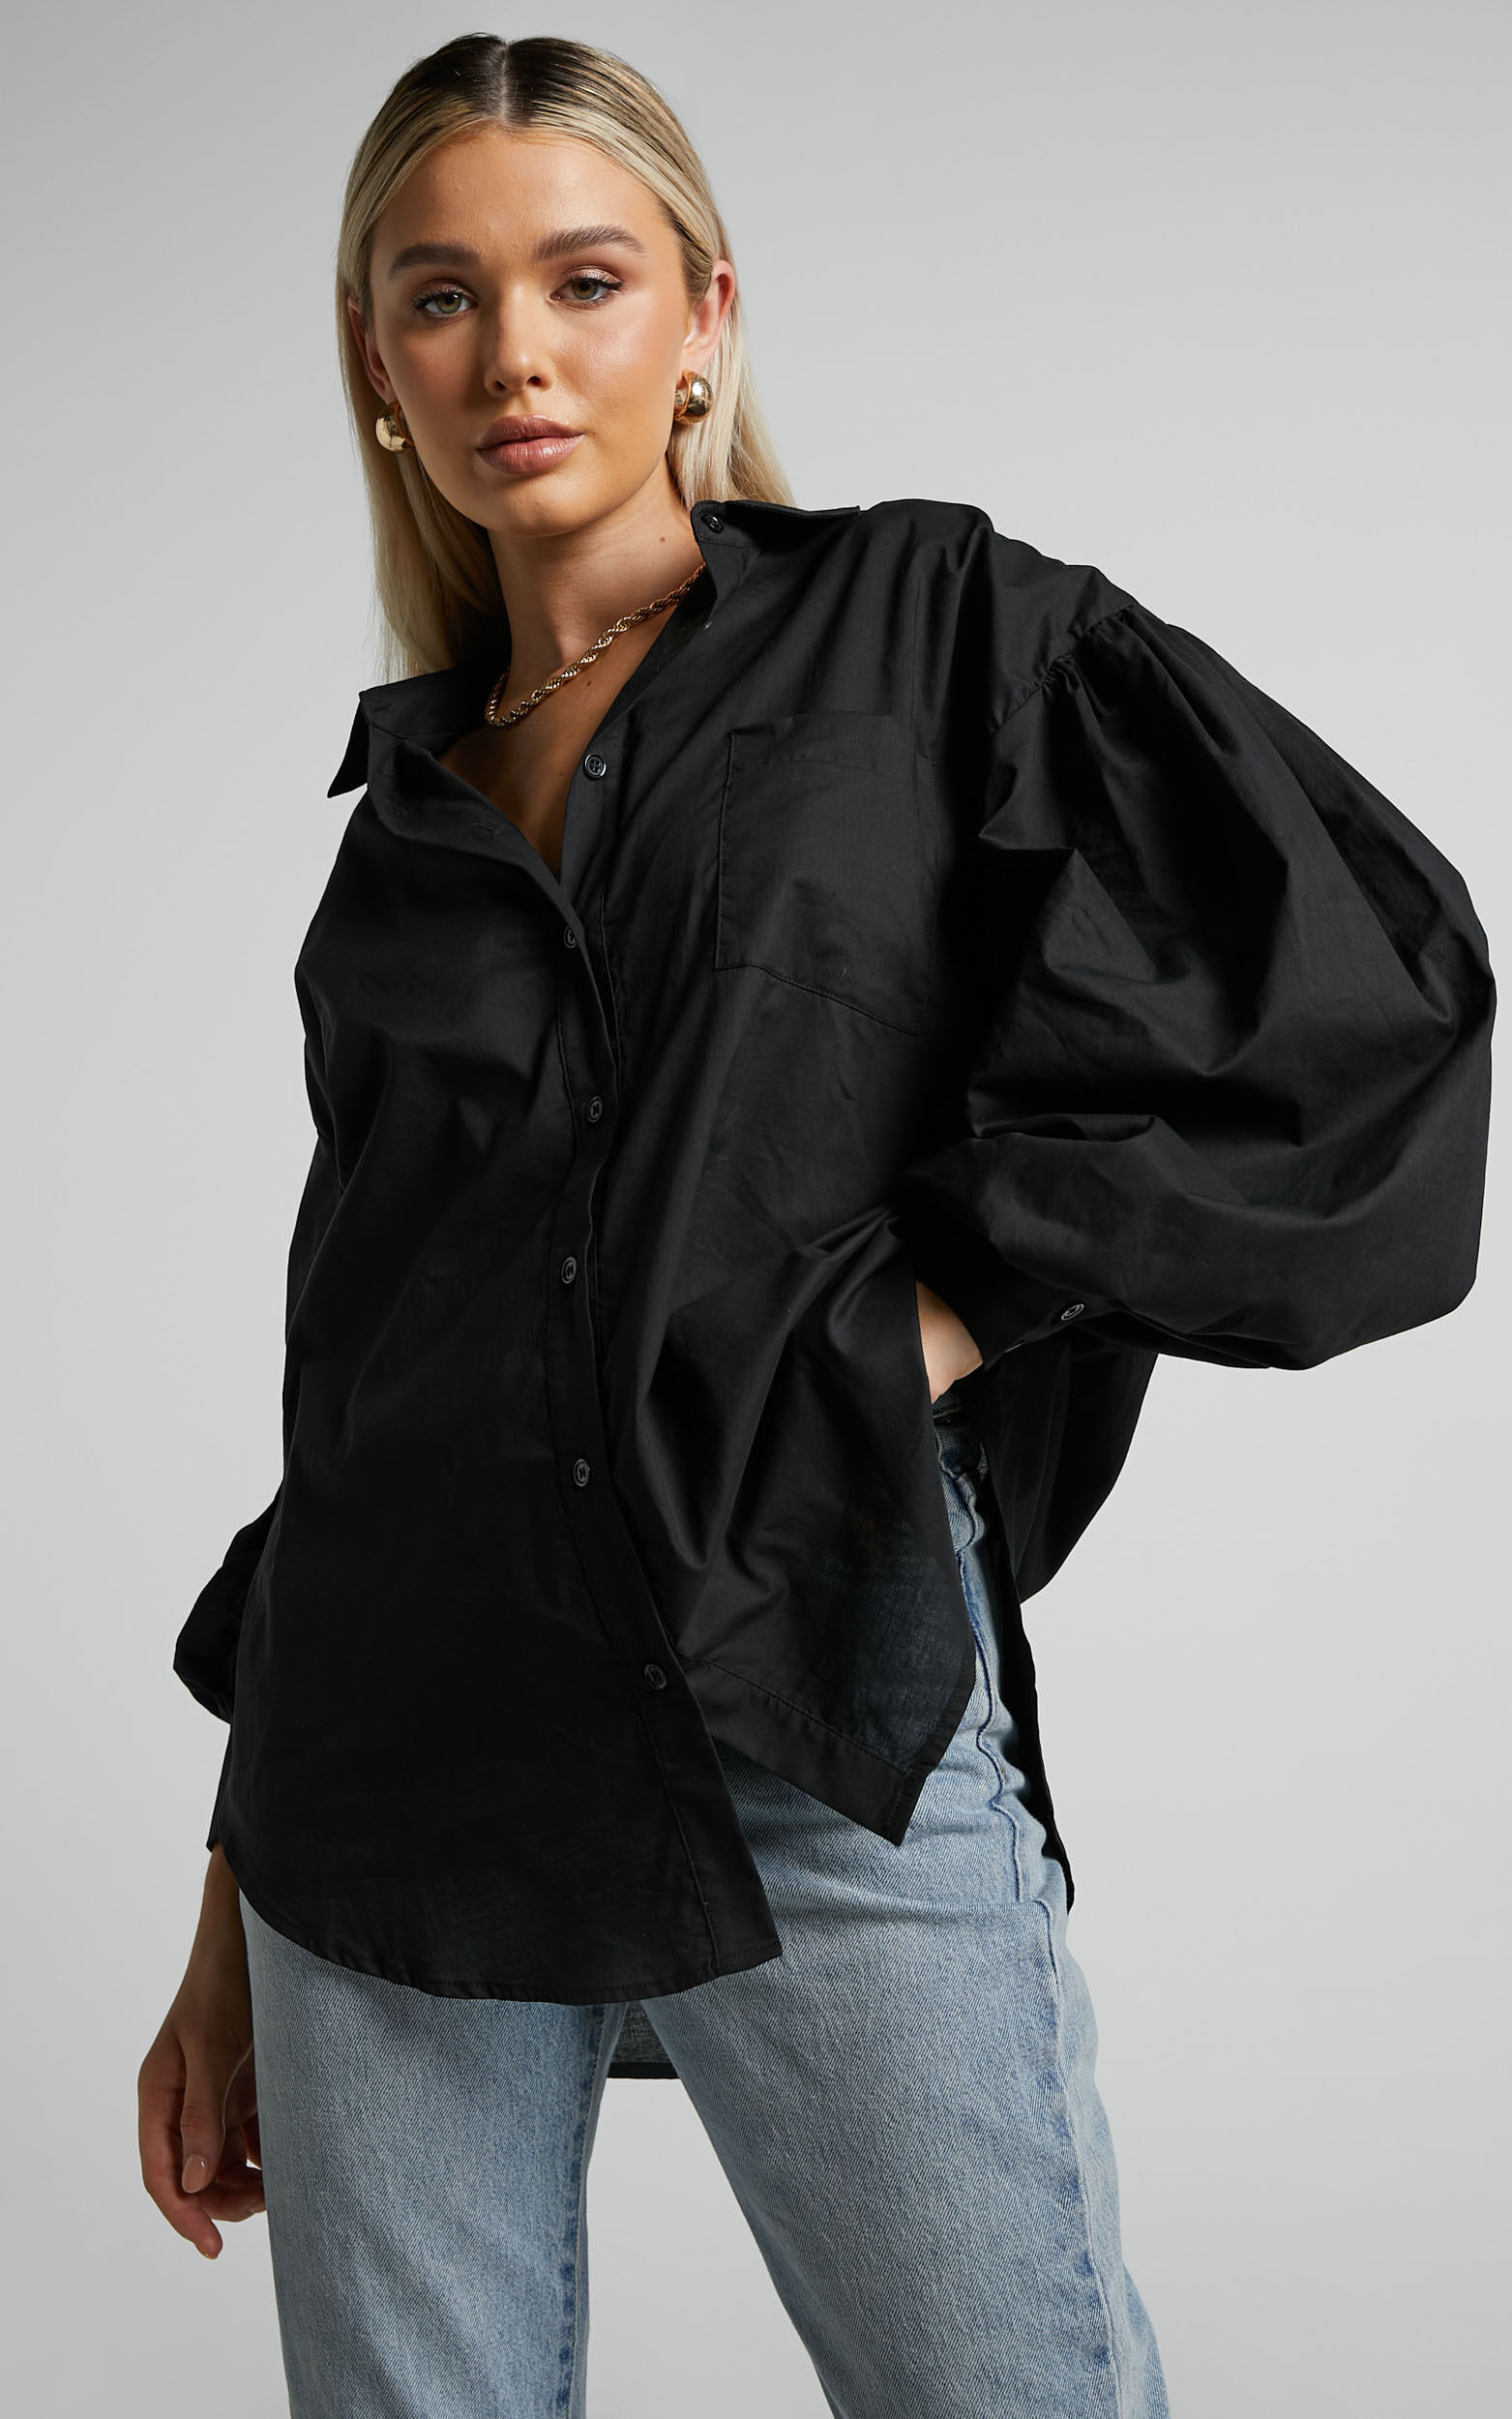 Delly Blouse - Relaxed Balloon Sleeve Button Up Blouse in Black - 04, BLK1